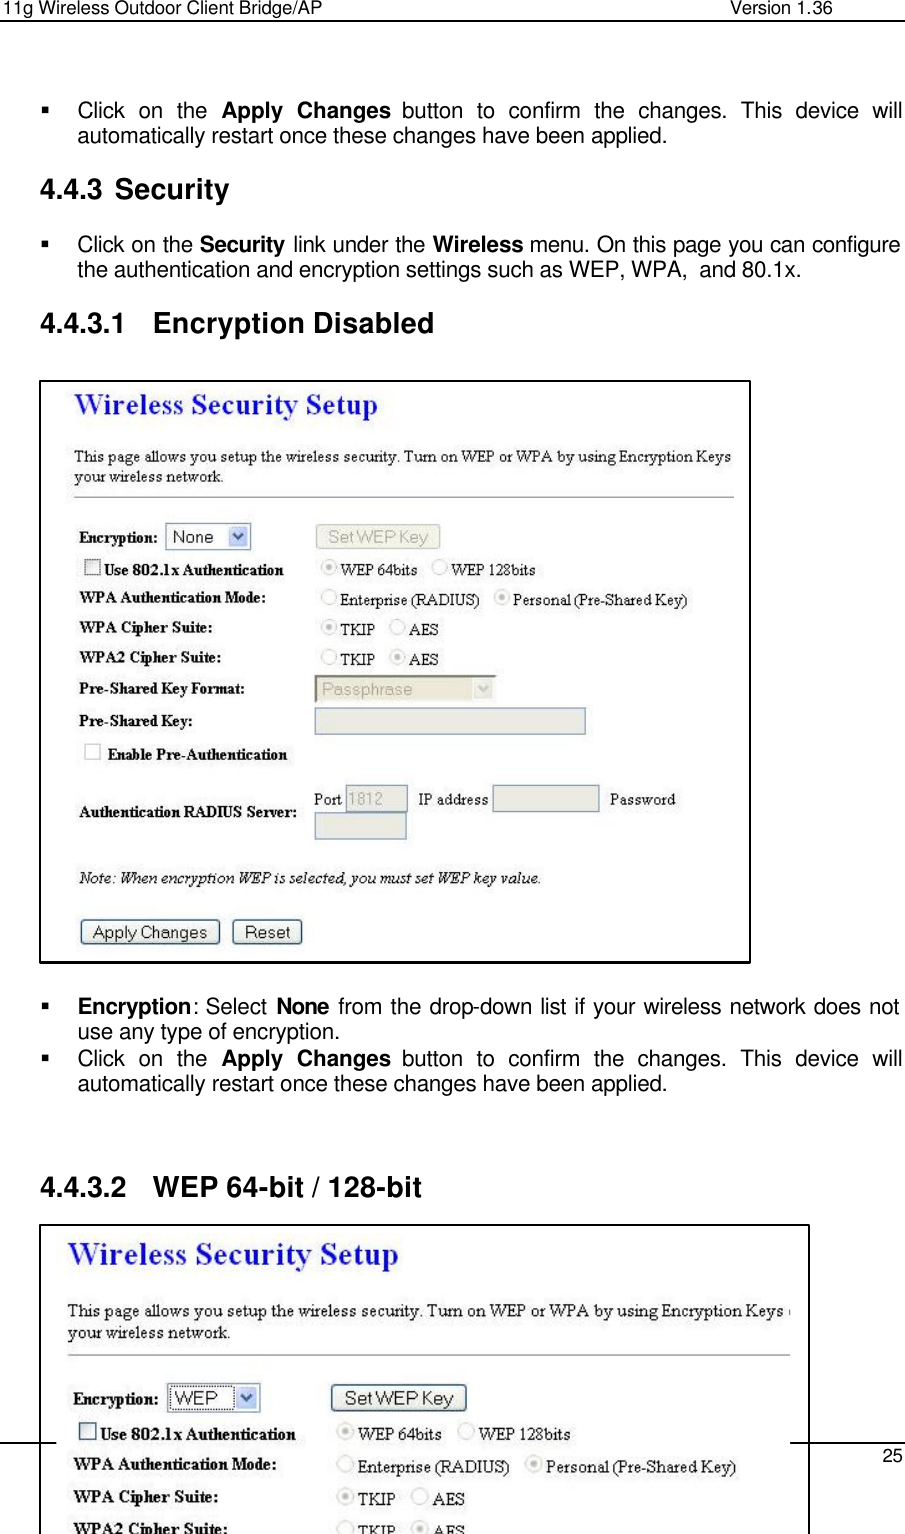 11g Wireless Outdoor Client Bridge/AP                Version 1.36    25   § Click on the Apply Changes button to confirm the changes. This device will automatically restart once these changes have been applied.   4.4.3 Security  § Click on the Security link under the Wireless menu. On this page you can configure the authentication and encryption settings such as WEP, WPA,  and 80.1x.   4.4.3.1 Encryption Disabled                          § Encryption: Select None from the drop-down list if your wireless network does not use any type of encryption.  § Click on the Apply Changes button to confirm the changes. This device will automatically restart once these changes have been applied.     4.4.3.2 WEP 64-bit / 128-bit        